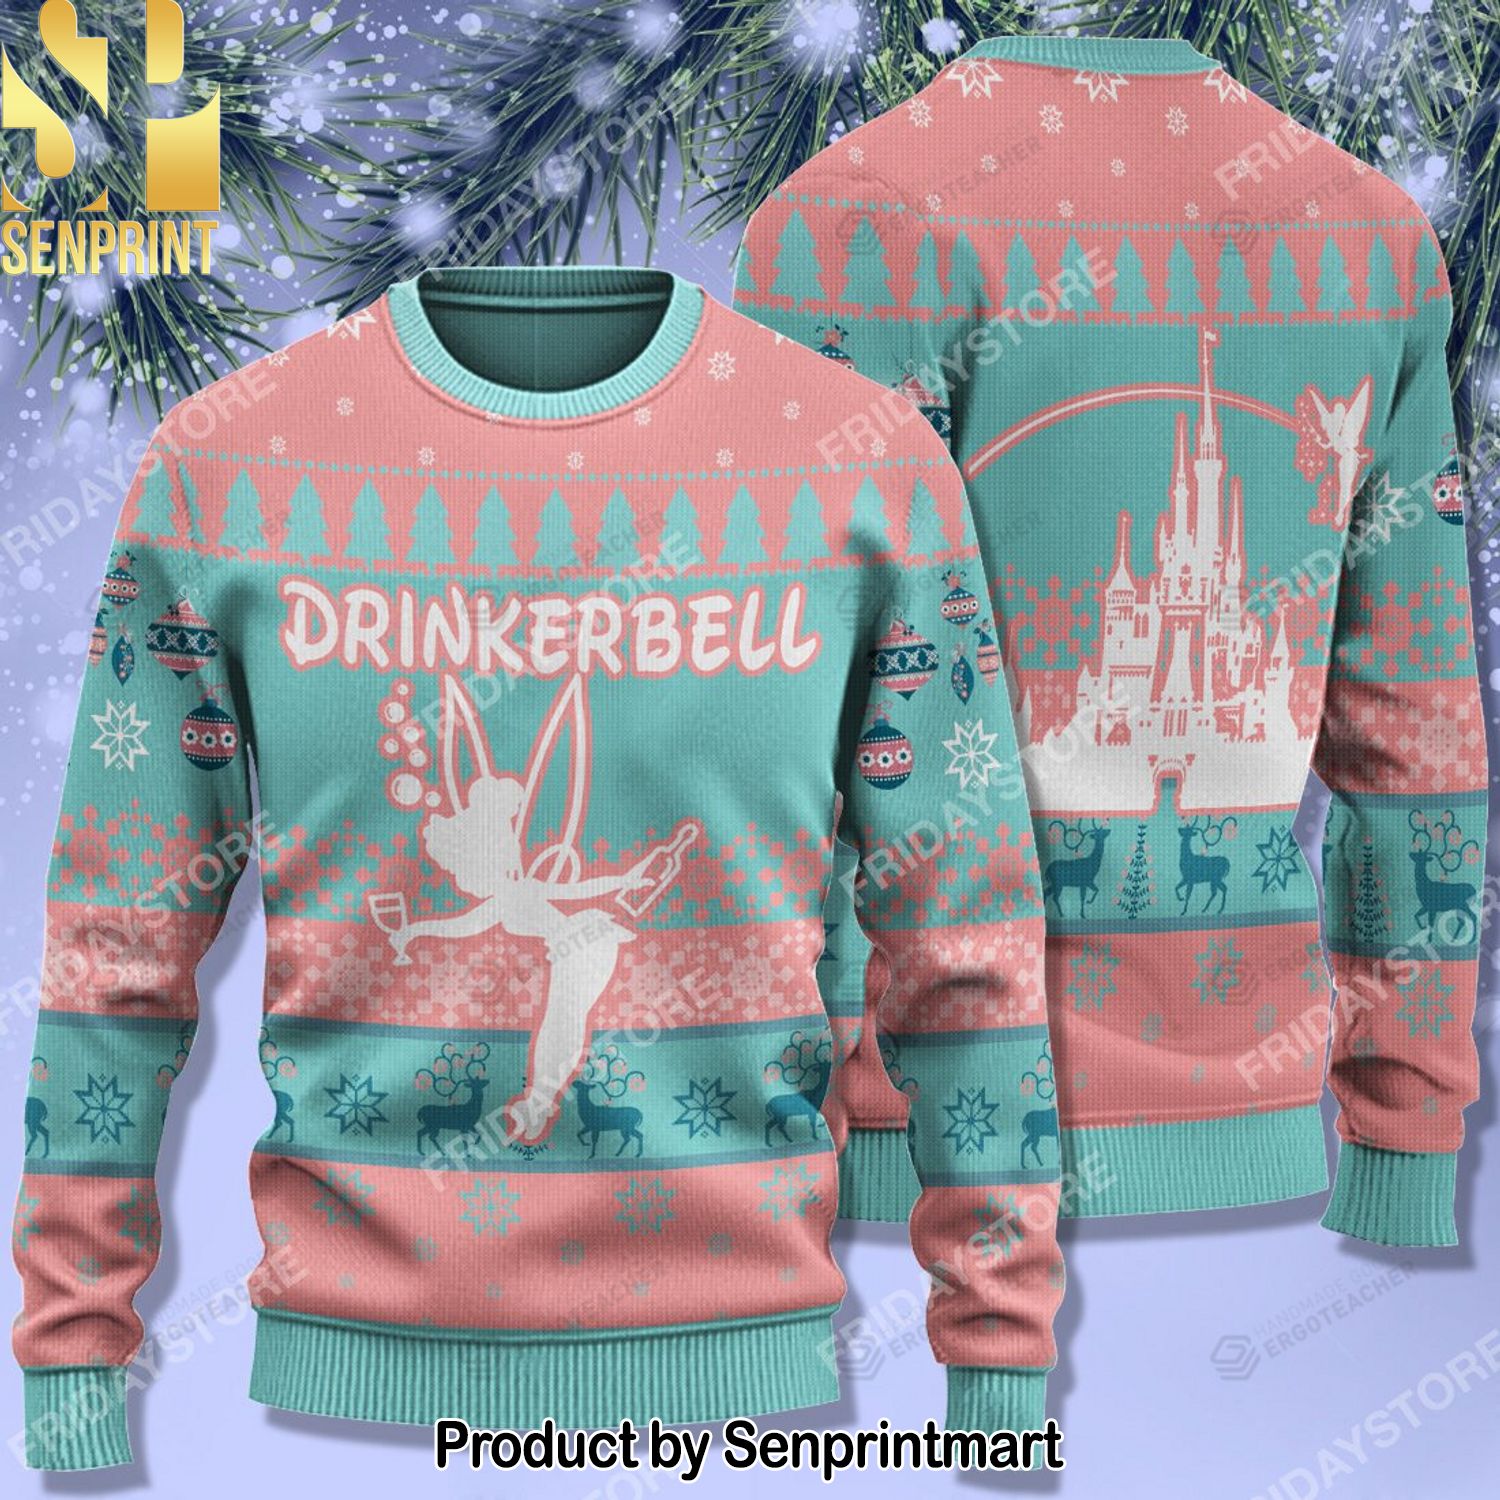 DN Drinkerbell Christmas Blue Pink For Christmas Gifts 3D Printed Ugly Christmas Sweater